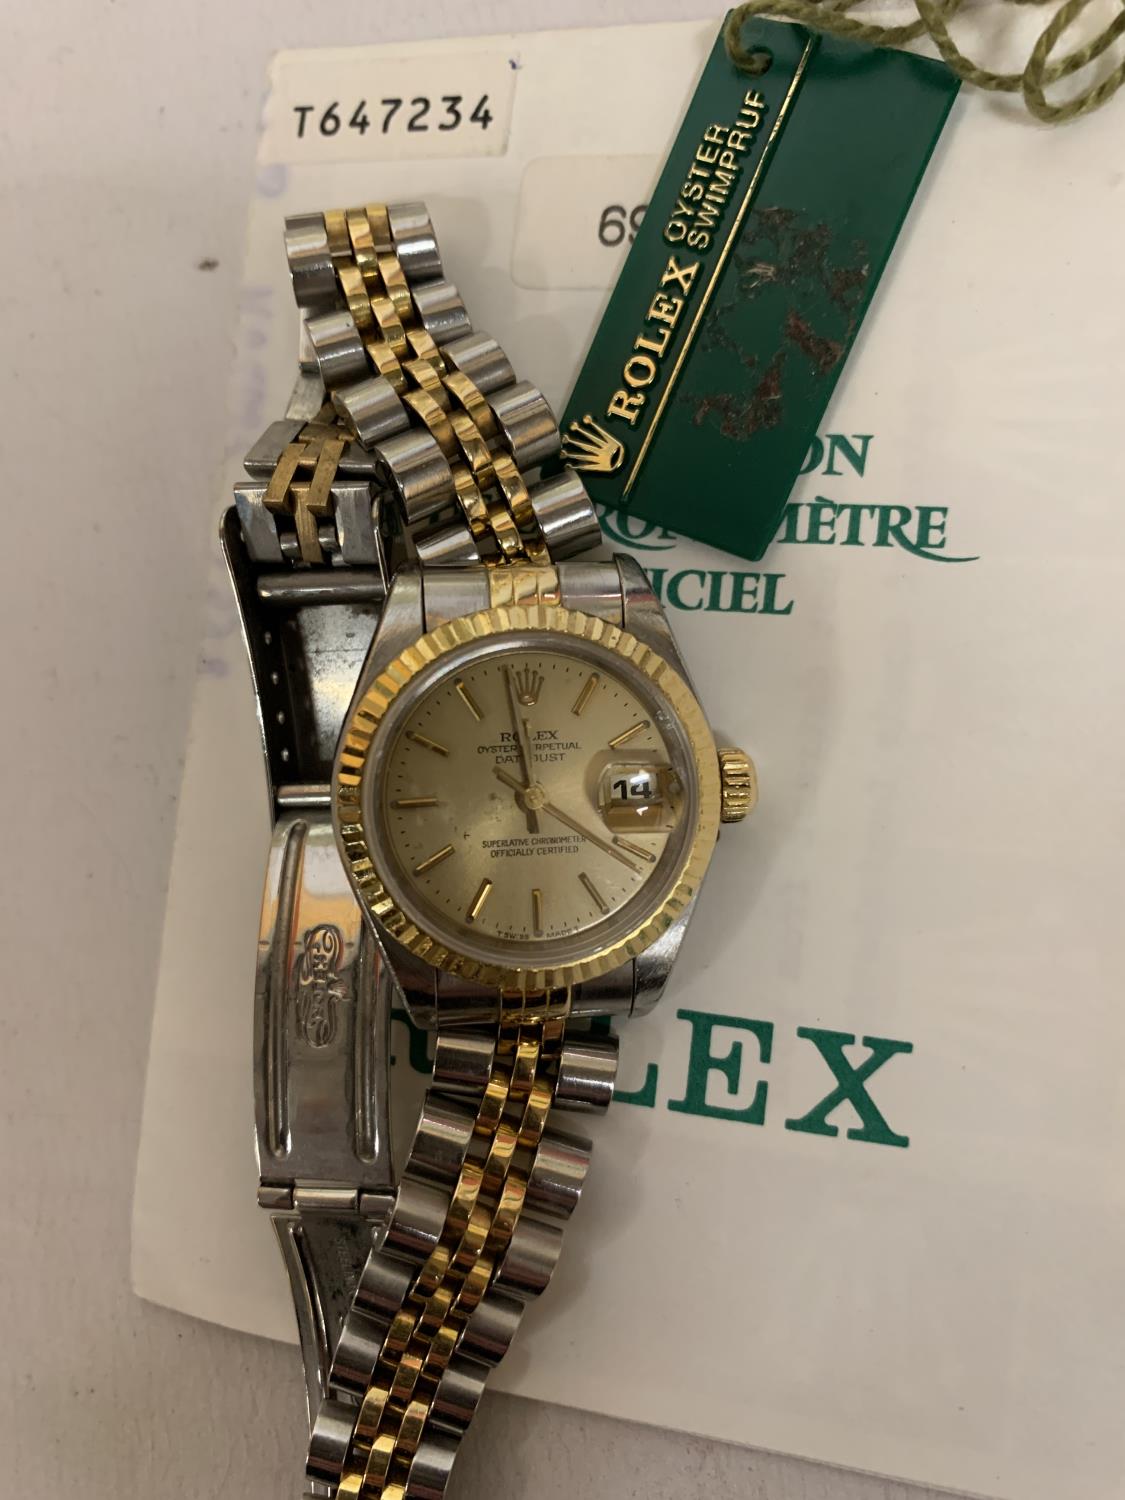 A LADIES' BI-METAL ROLEX DATEJUST WRISTWATCH WITH TAGS AND CARD - Image 2 of 3